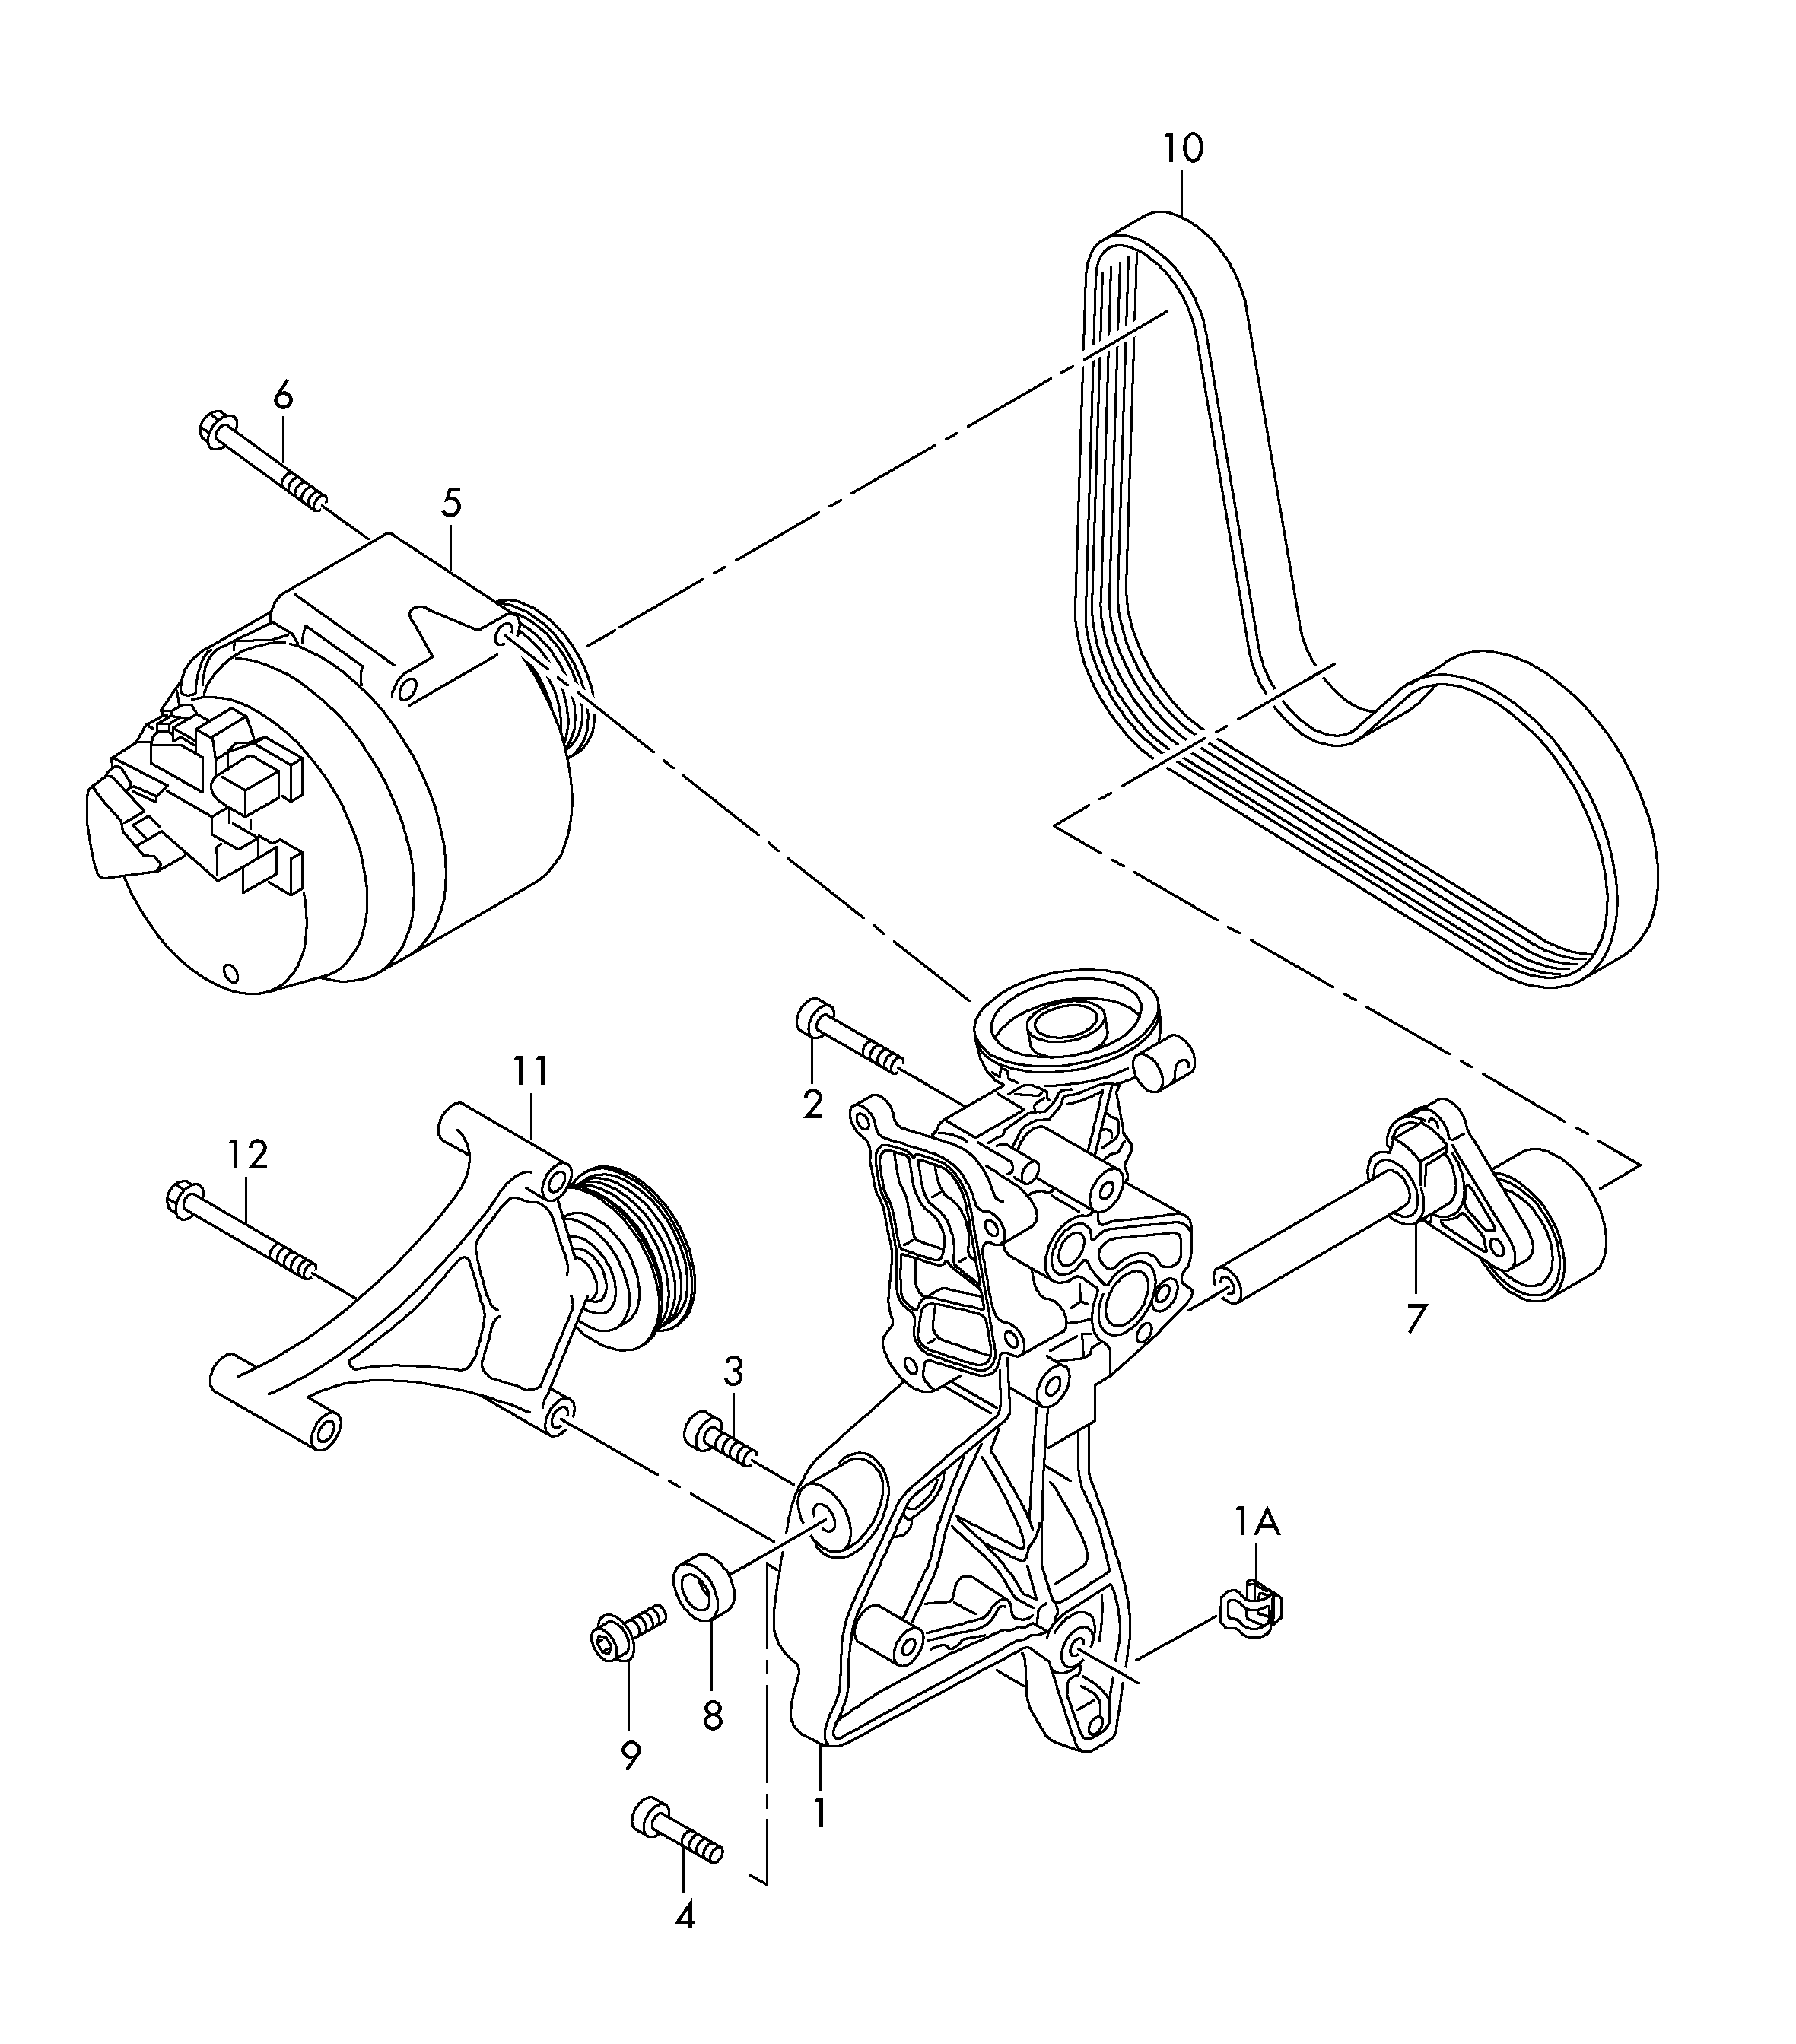 connecting and mounting parts<br>for alternatorPoly-V-belt 2.0 Ltr. - Jetta - je